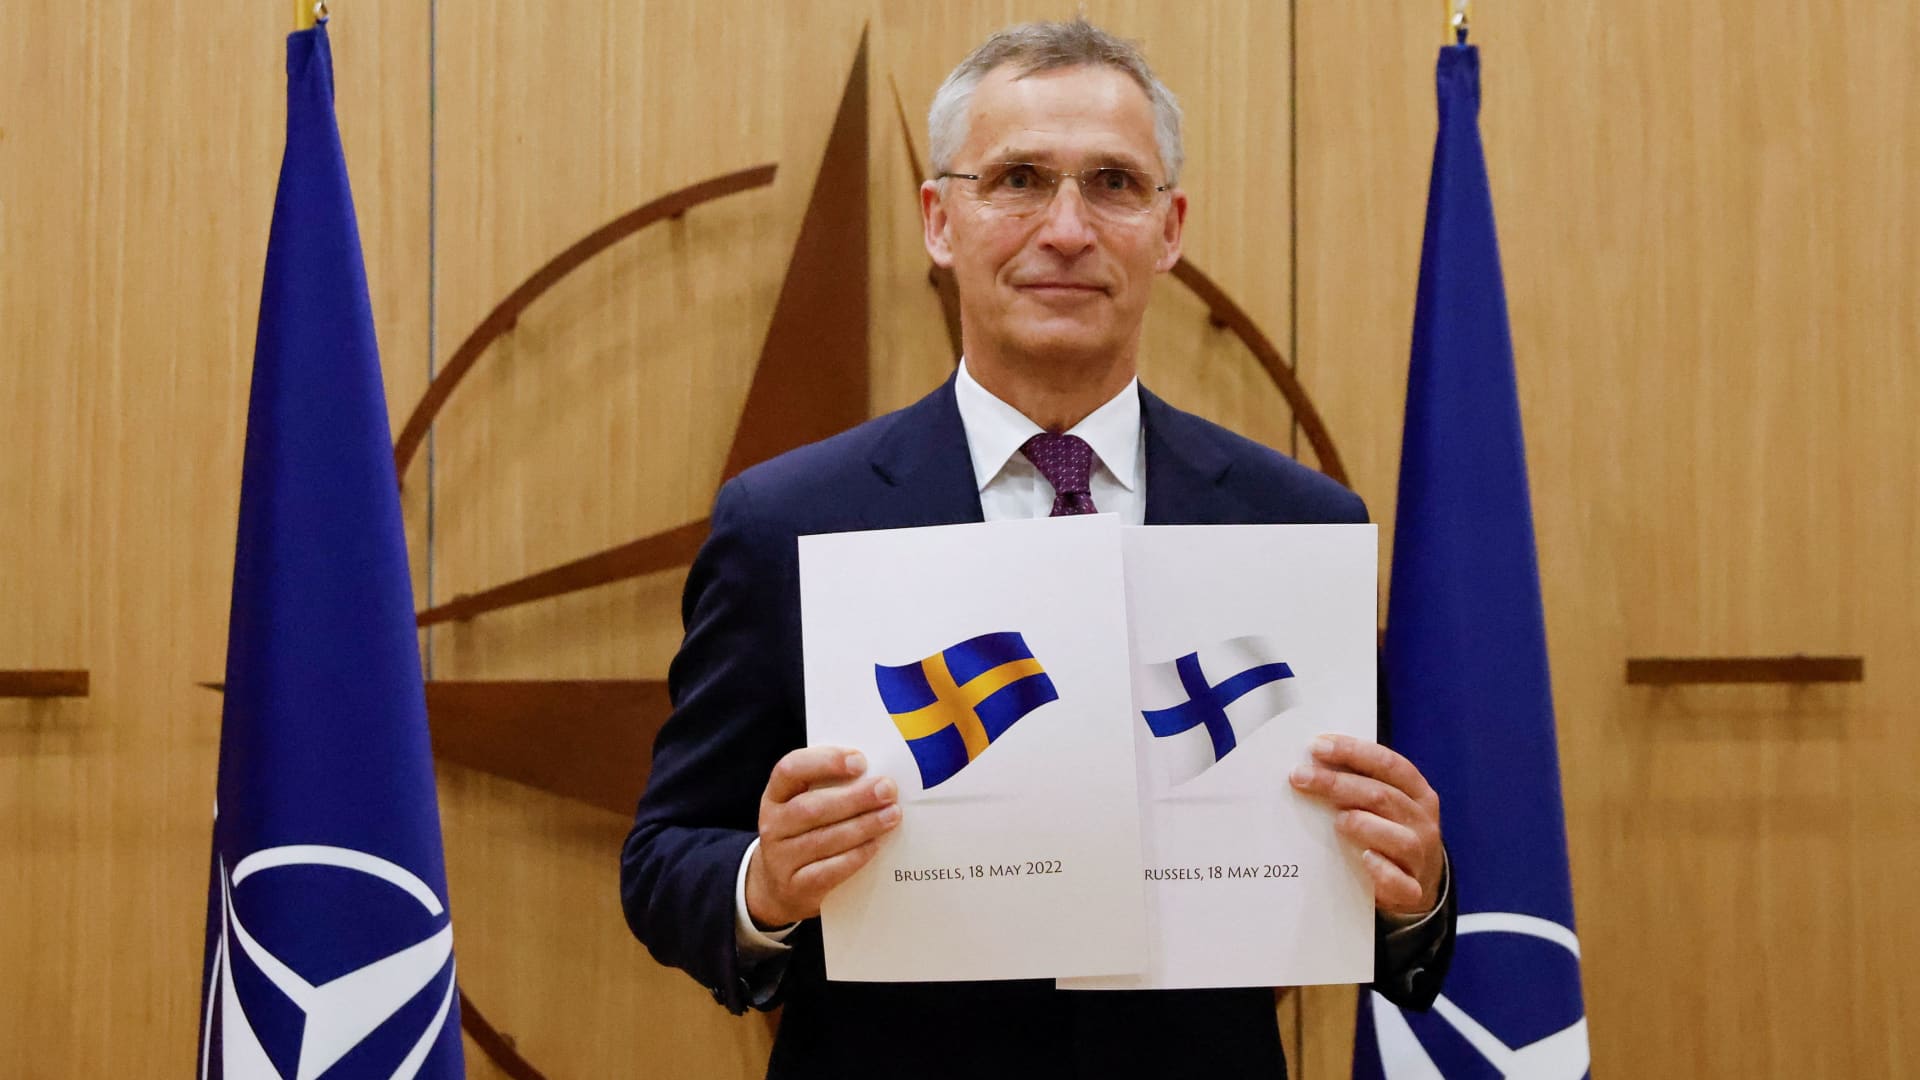 NATO Secretary-General Jens Stoltenberg attends a ceremony to mark Sweden's and Finland's application for membership in Brussels, Belgium, May 18, 2022.